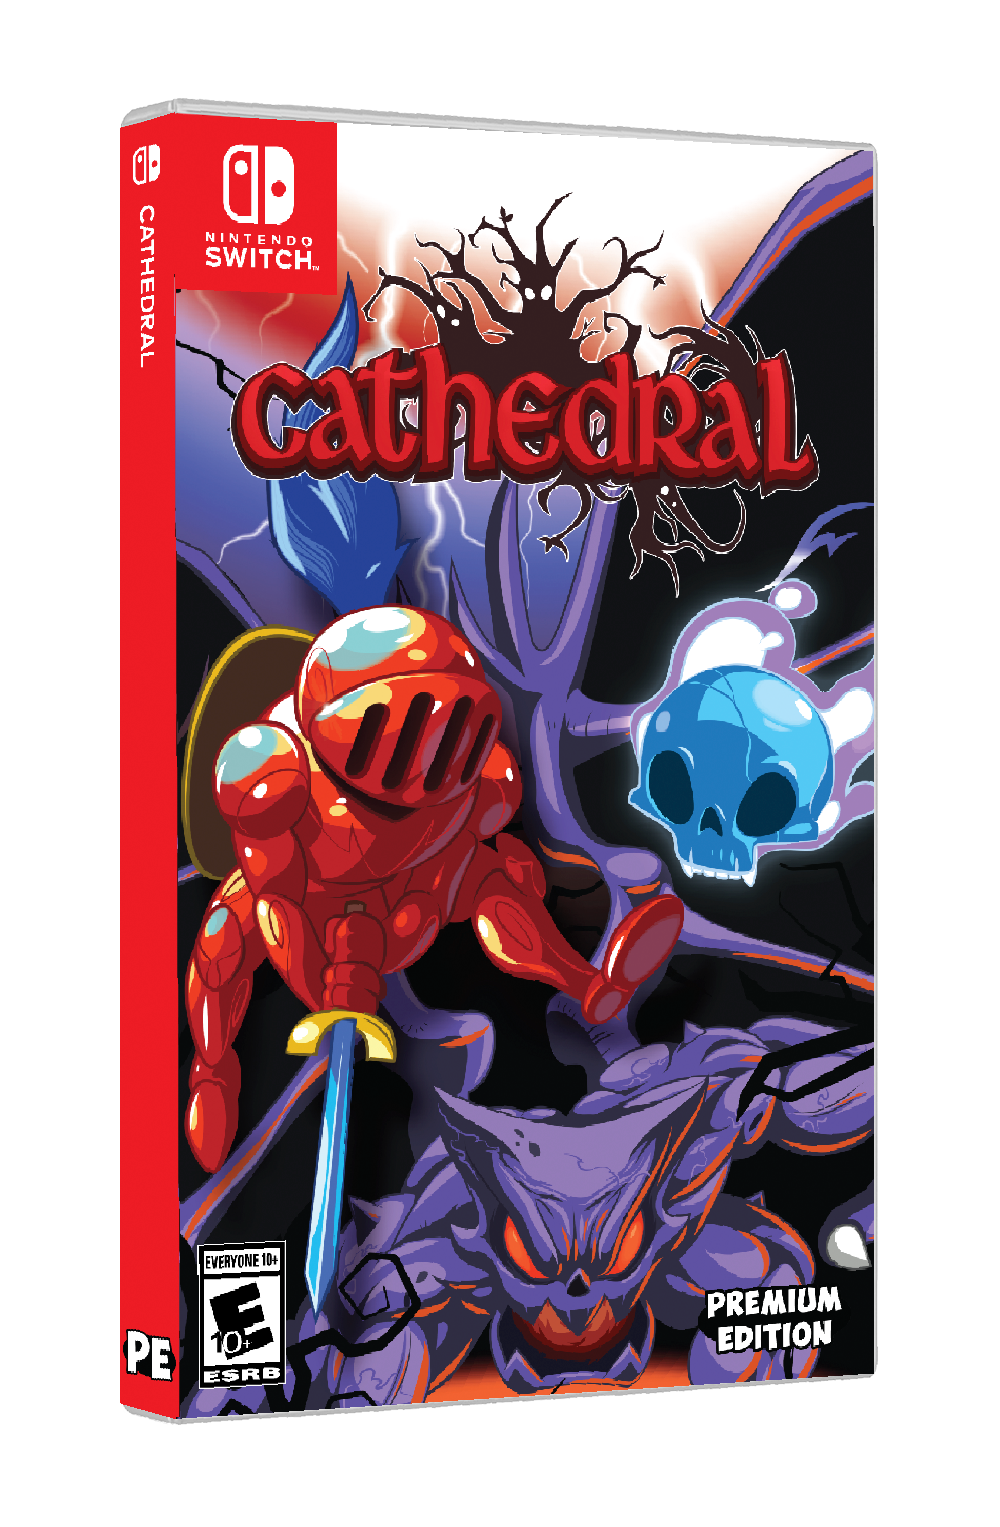 Cathedral - Standard Edition